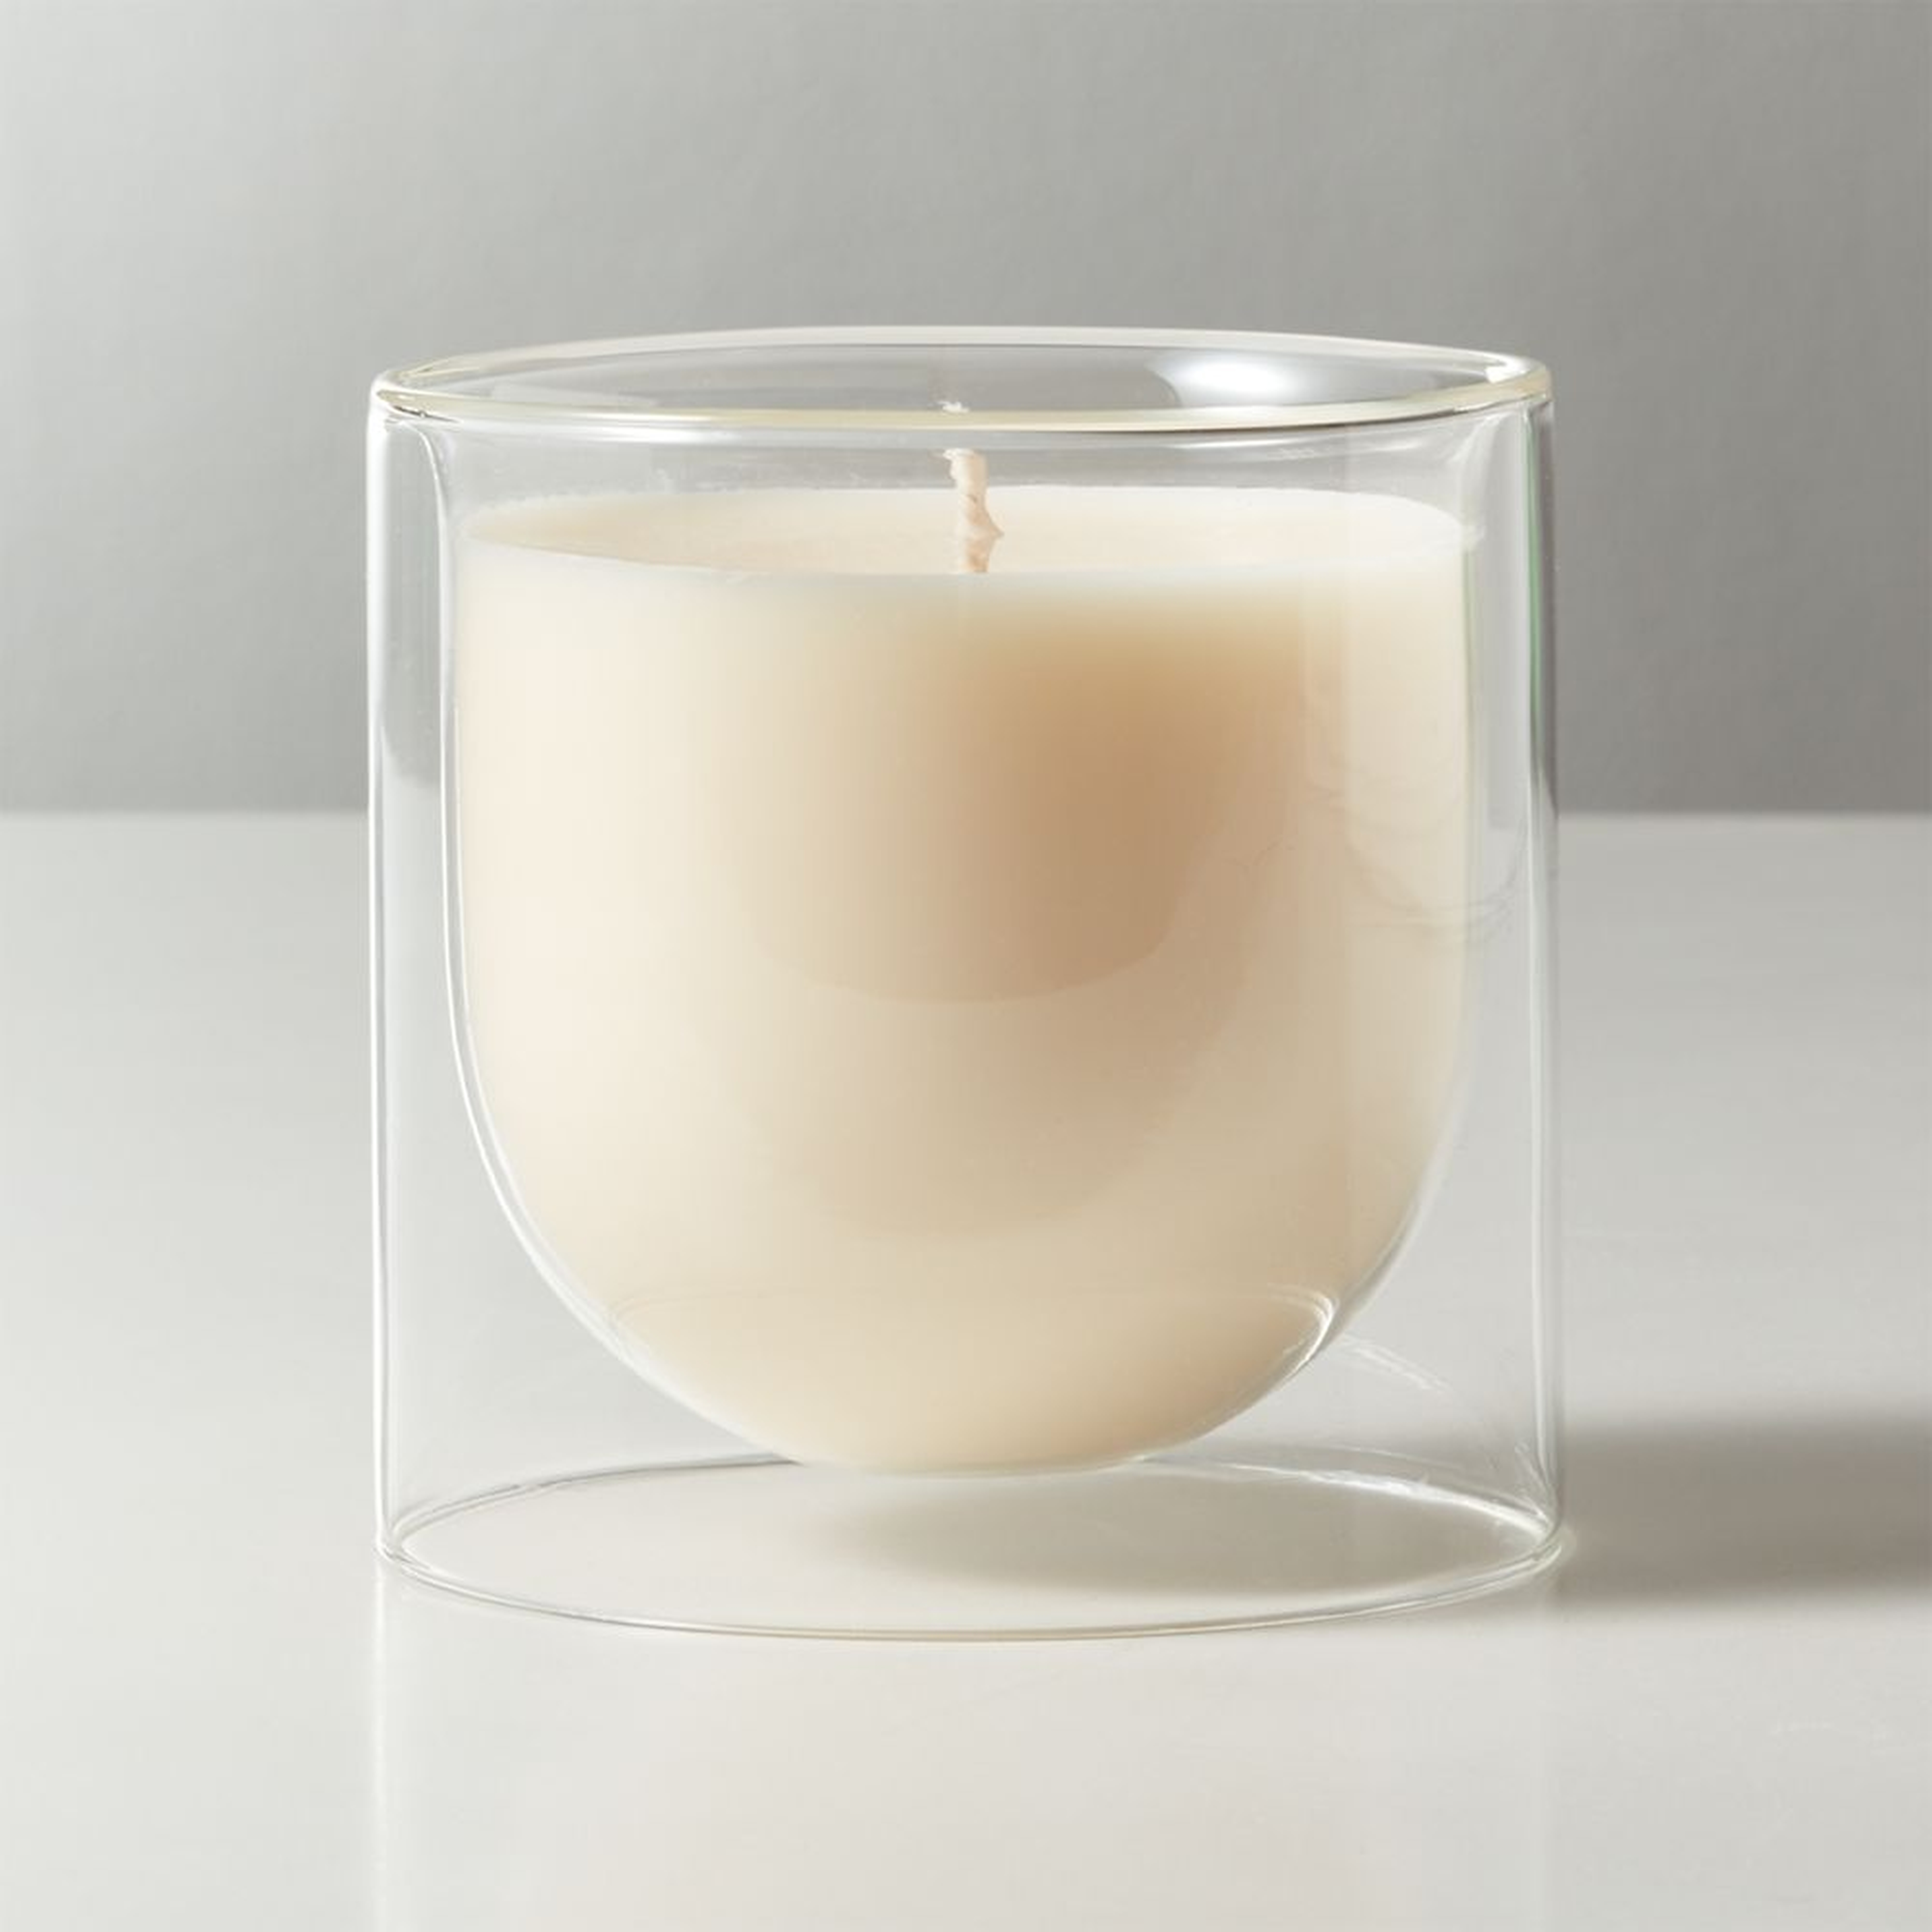 Lily and Seagrass Soy Candle - CB2